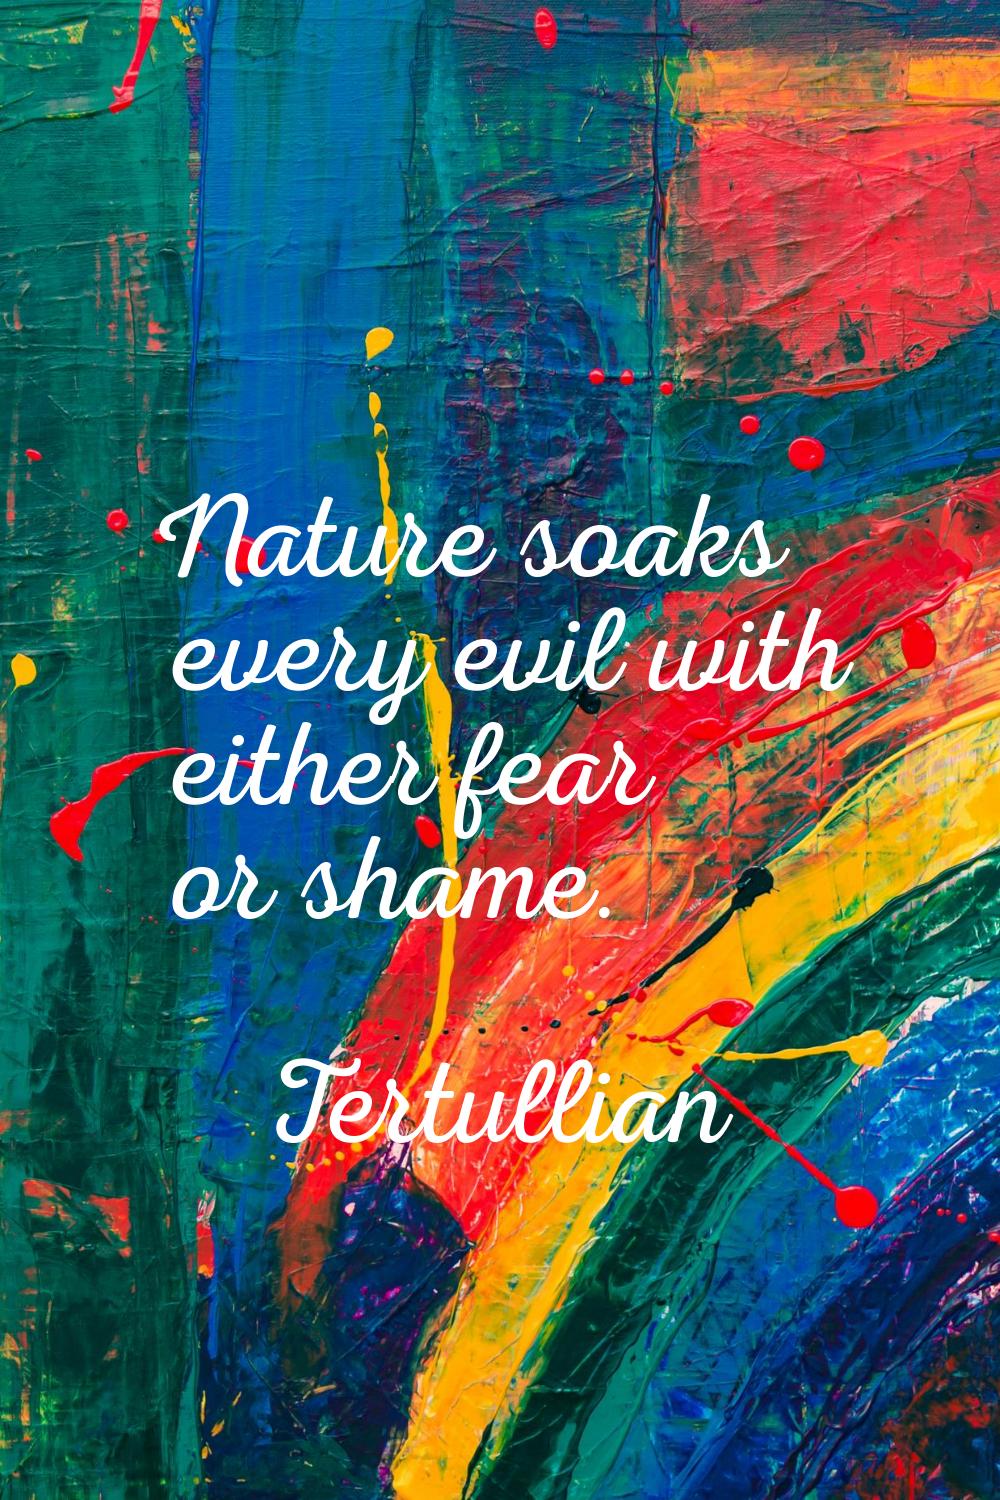 Nature soaks every evil with either fear or shame.